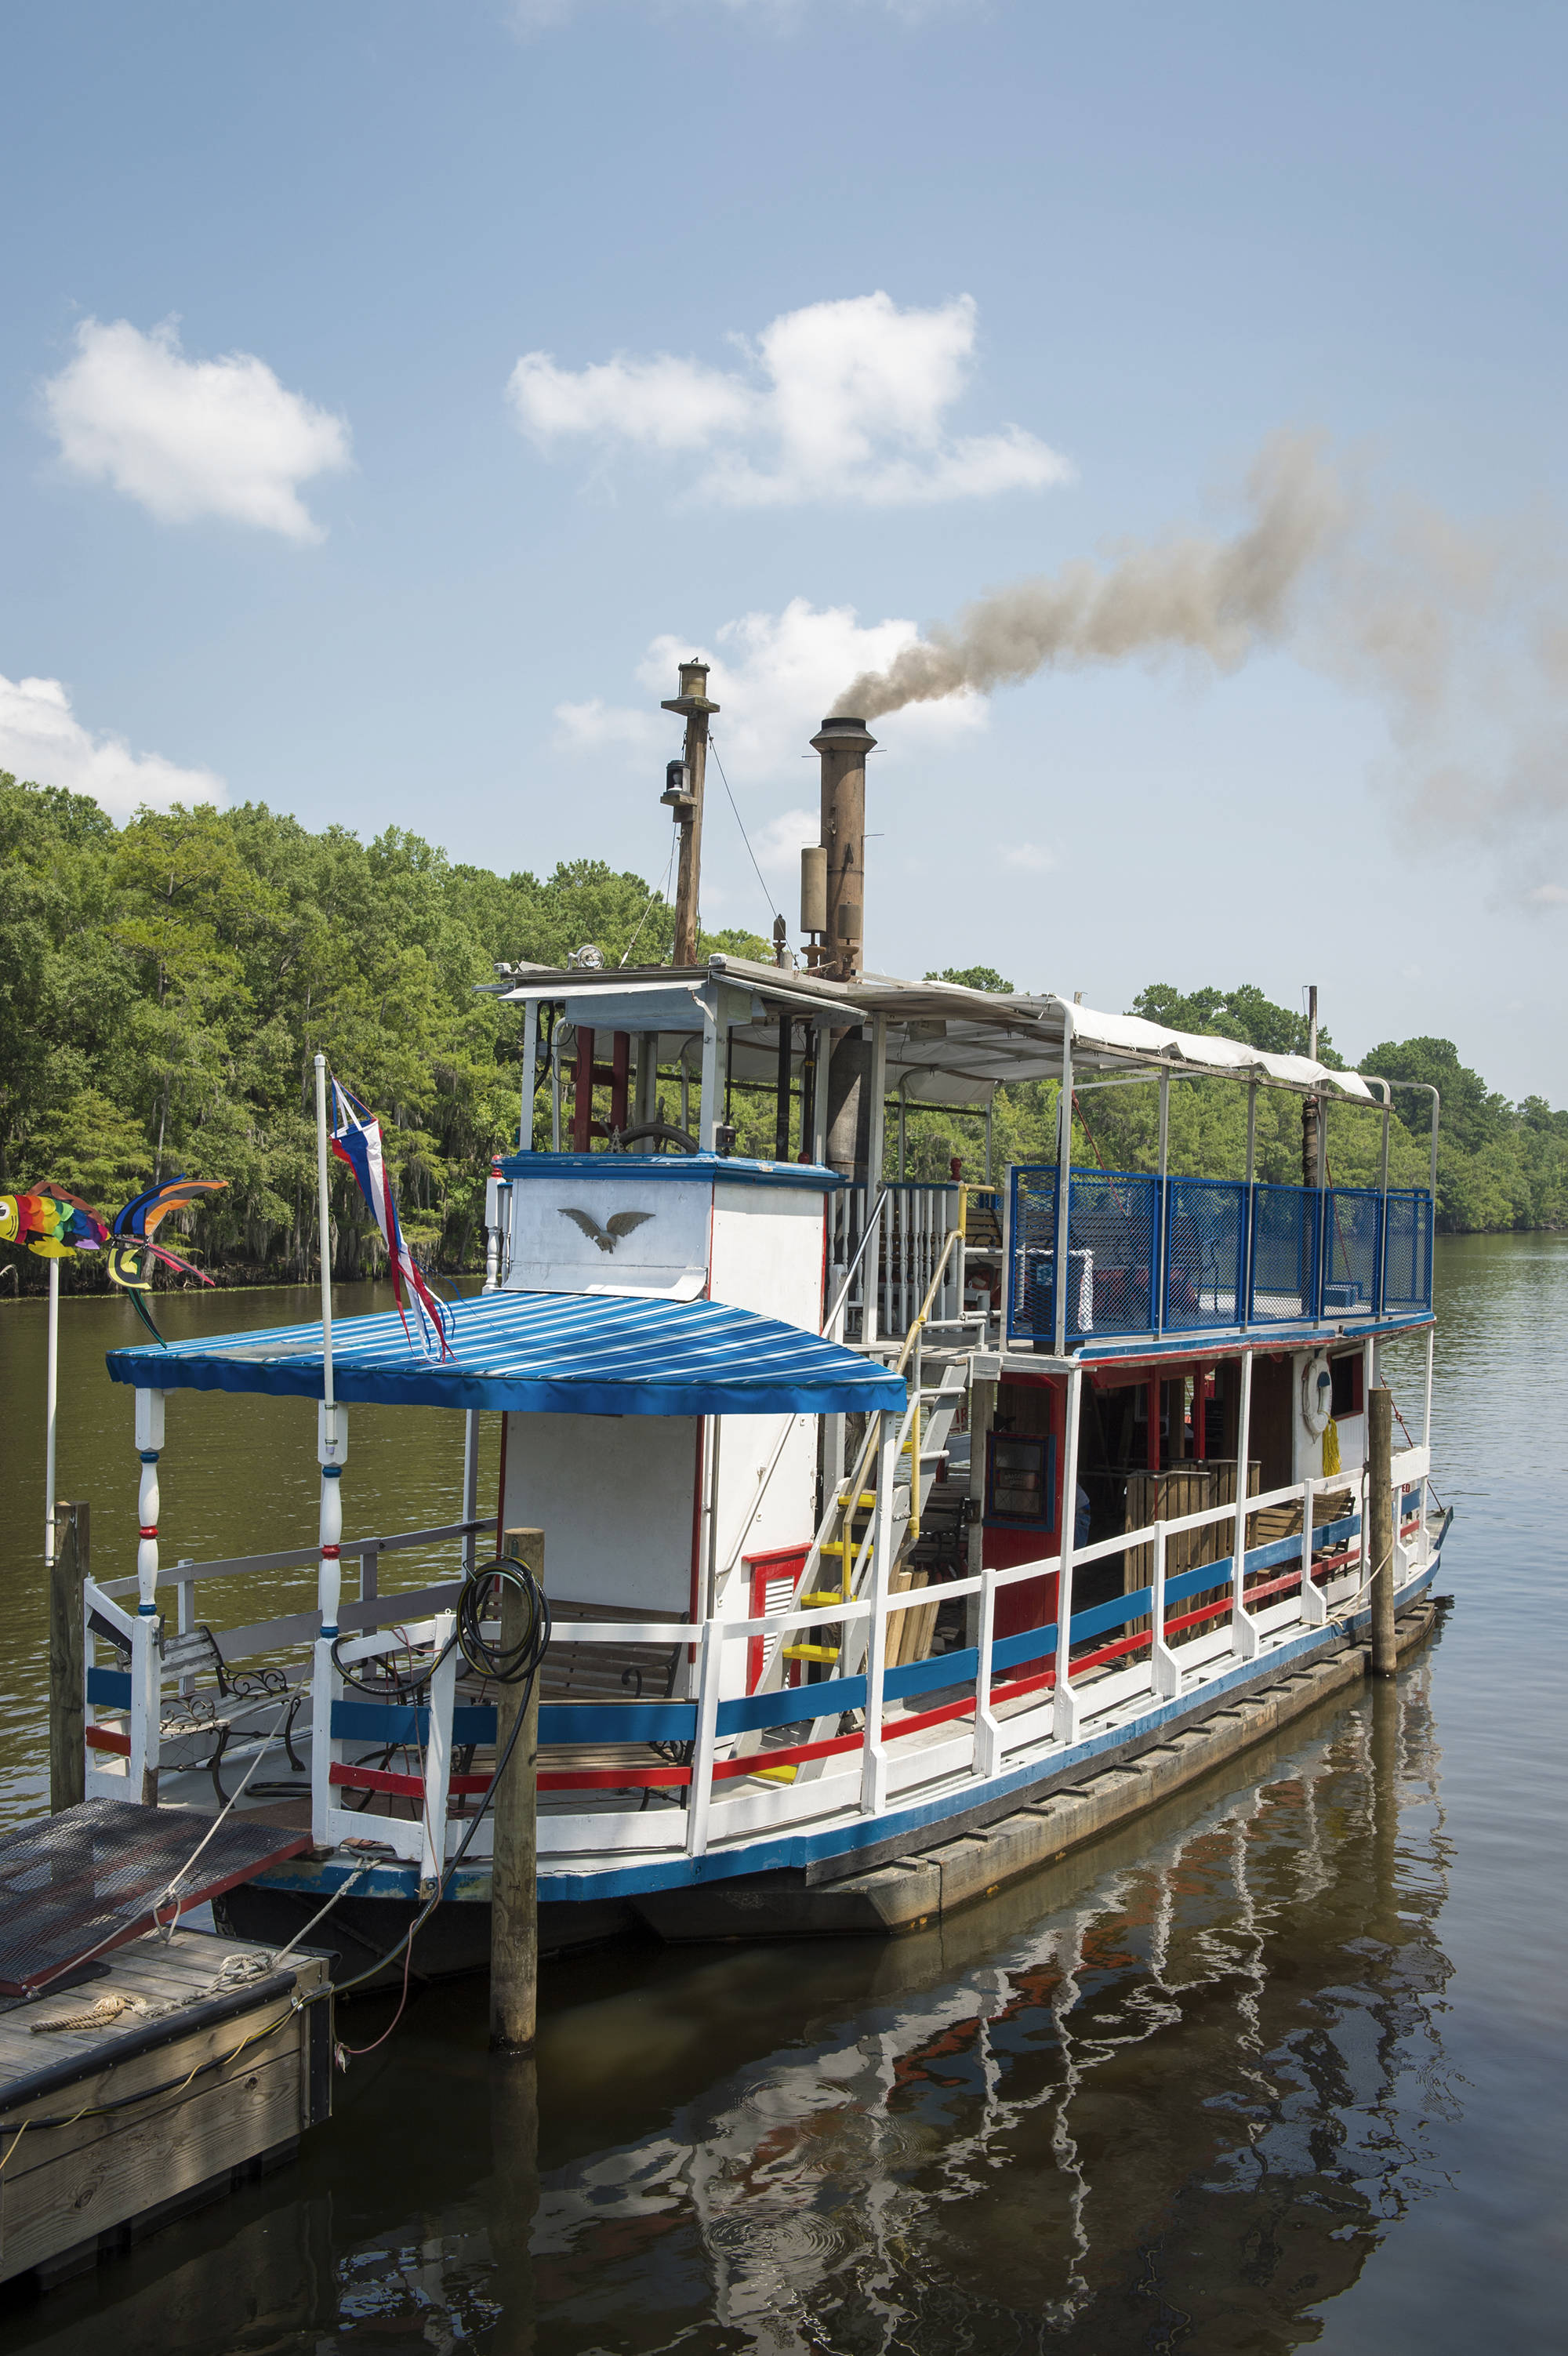 steamboat on the river in louisiana